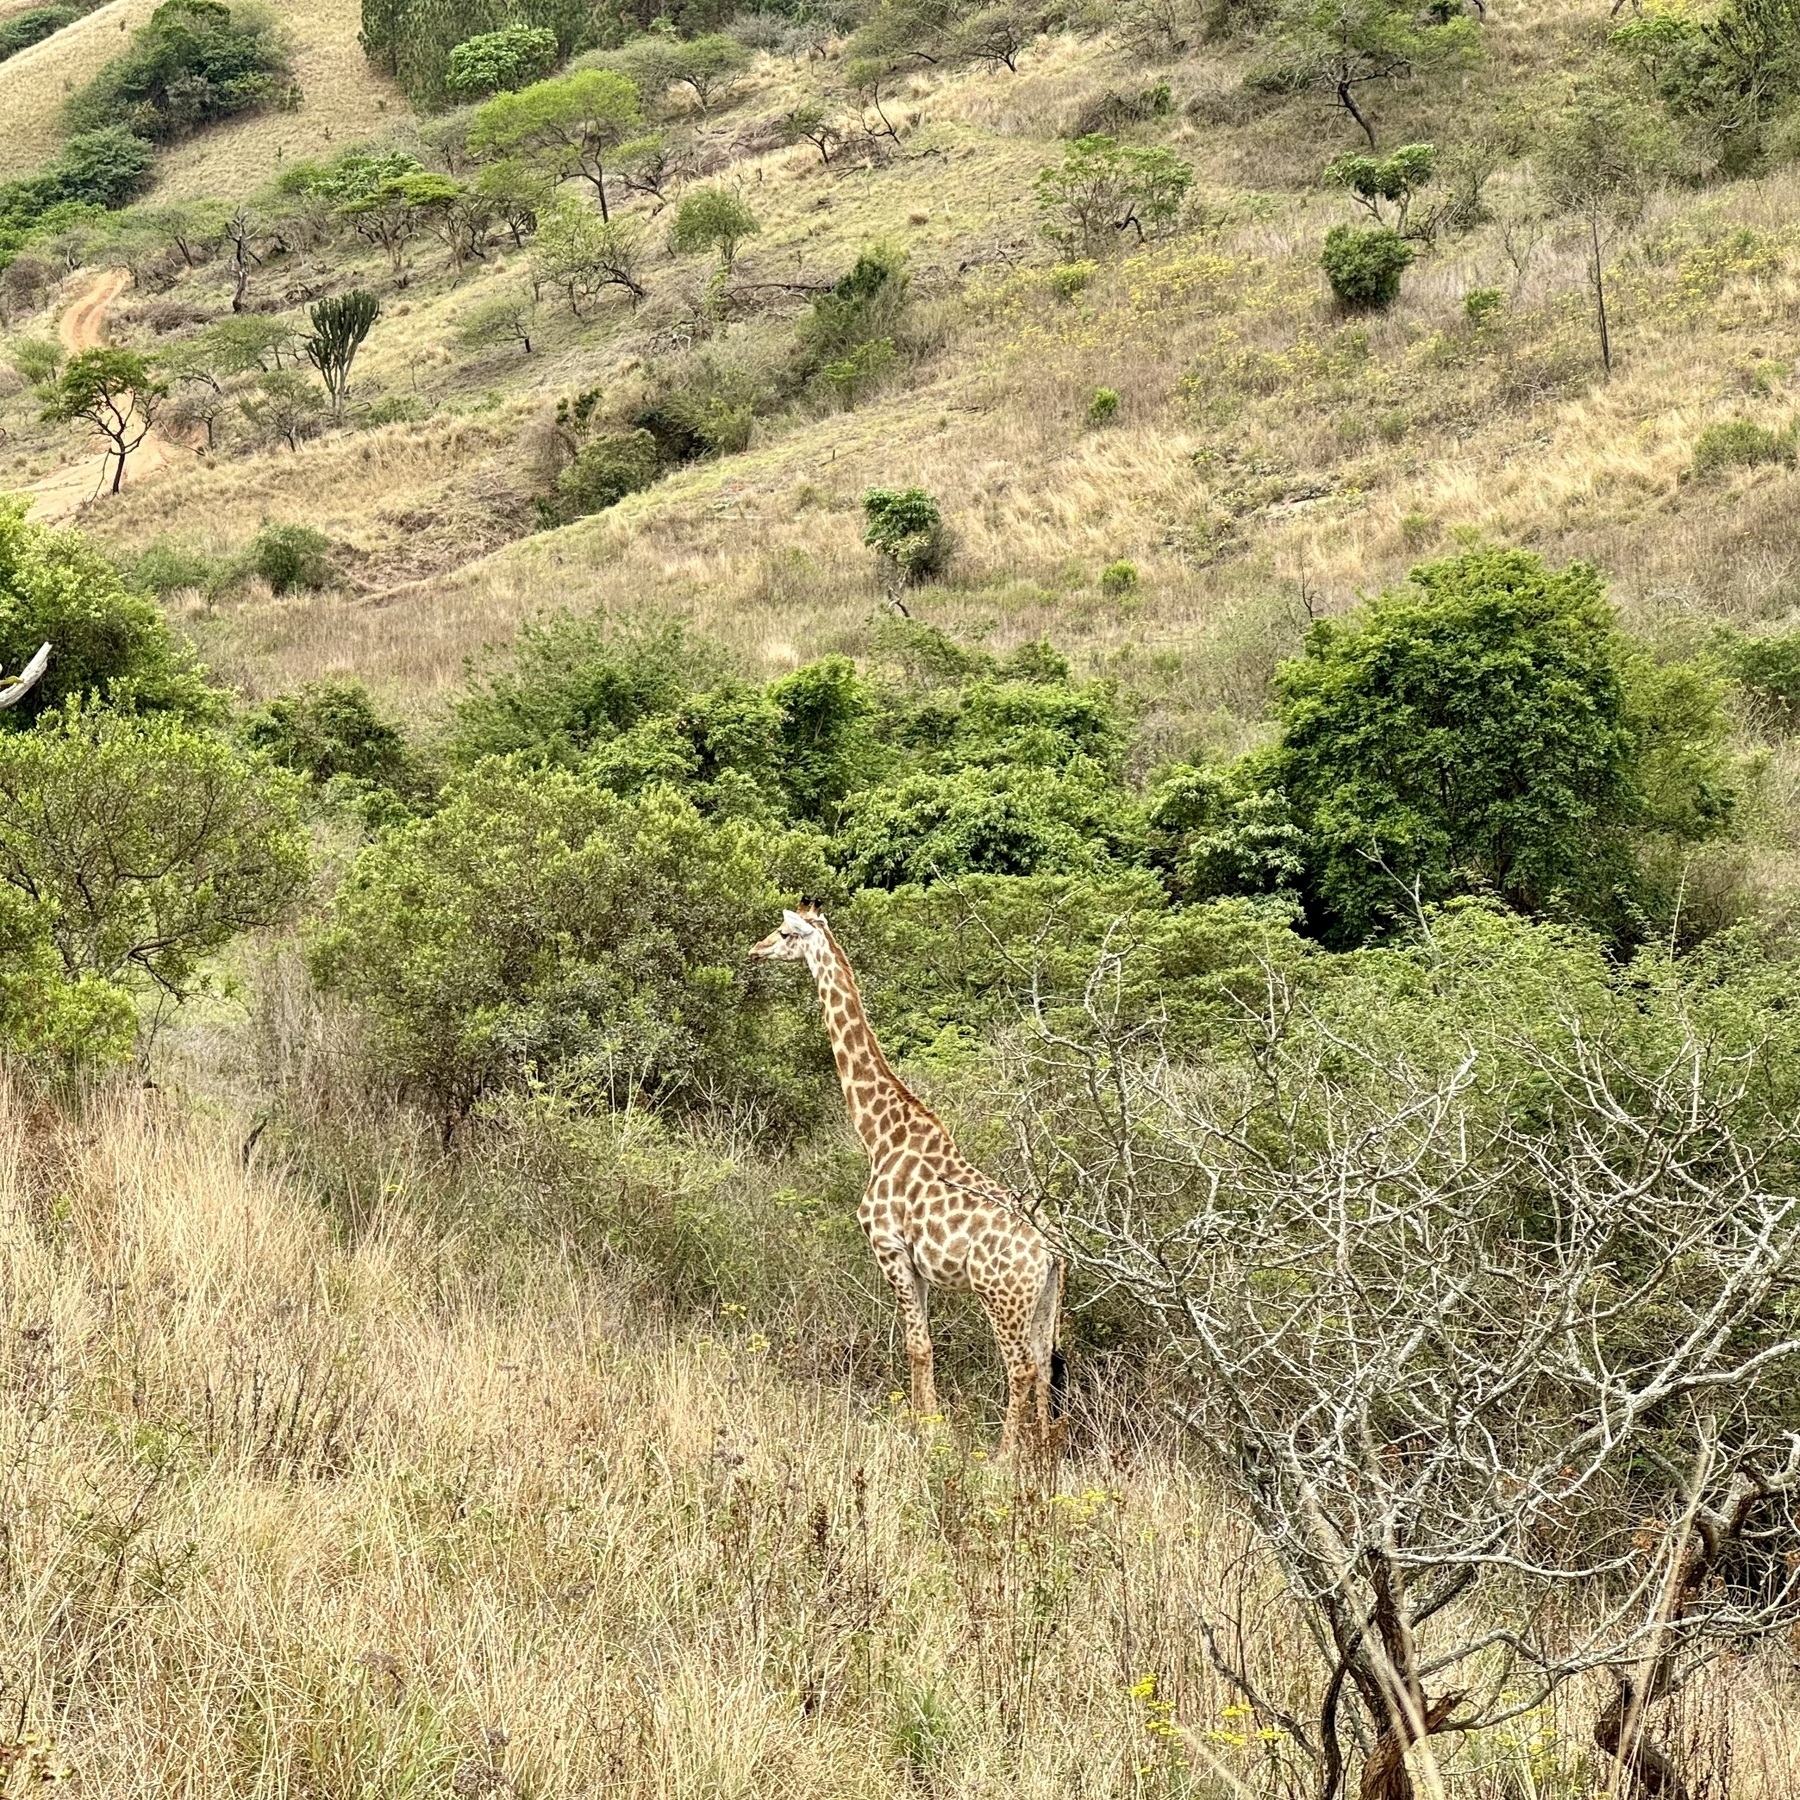 A giraffe in a valley with trees and grass behind.